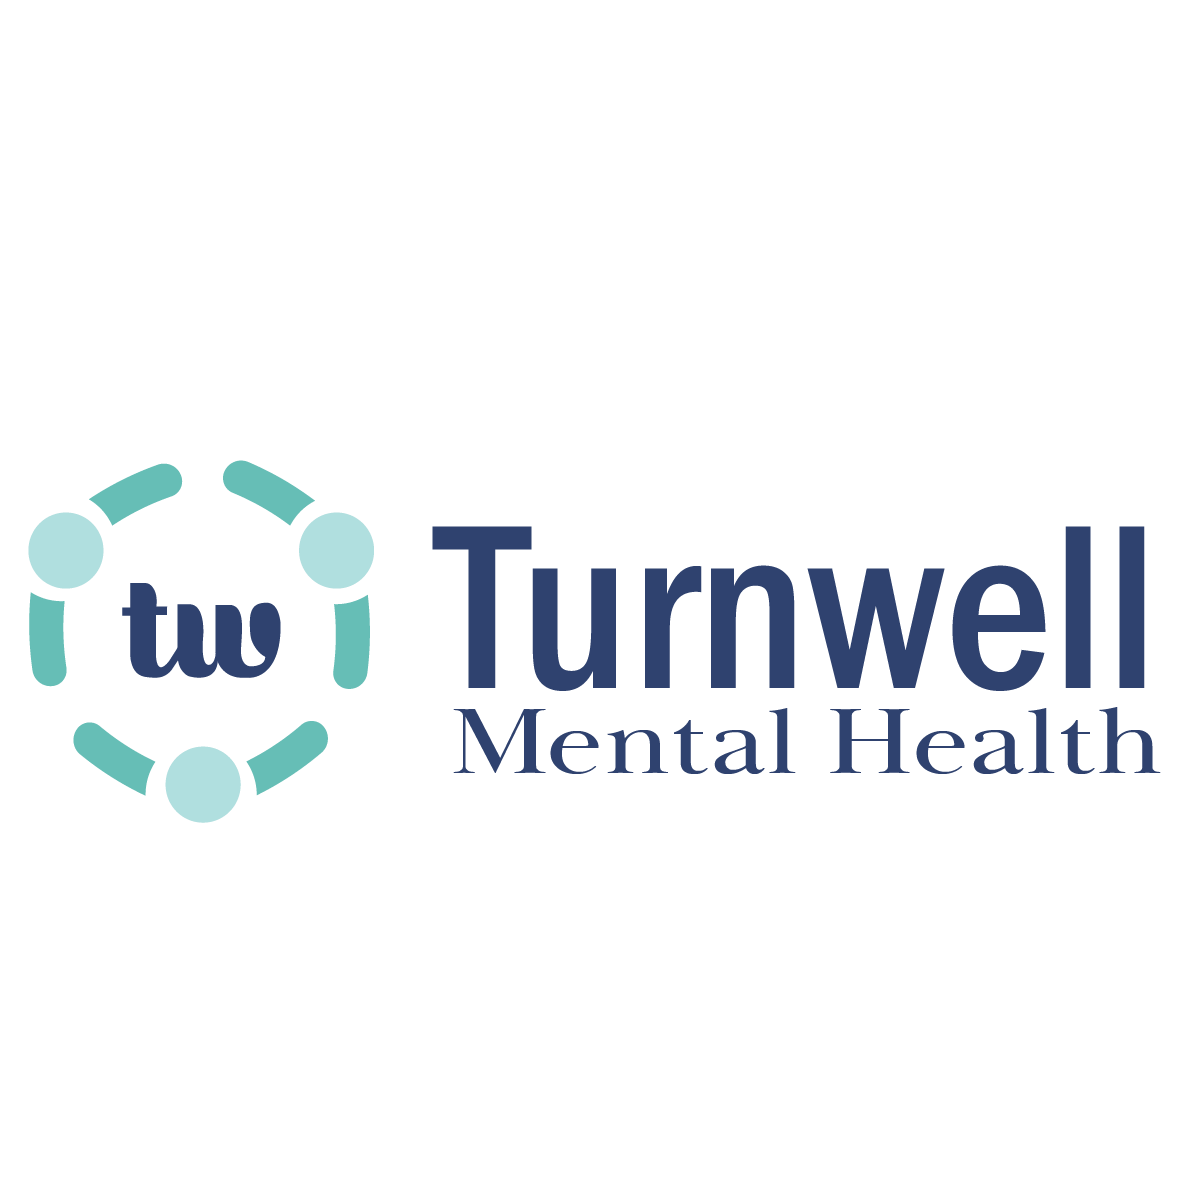 New Turnwell Mental Health Clinic Opens in Mount Pleasant, SC, Offering Comprehensive Mental Health Services to the Tri-County Area